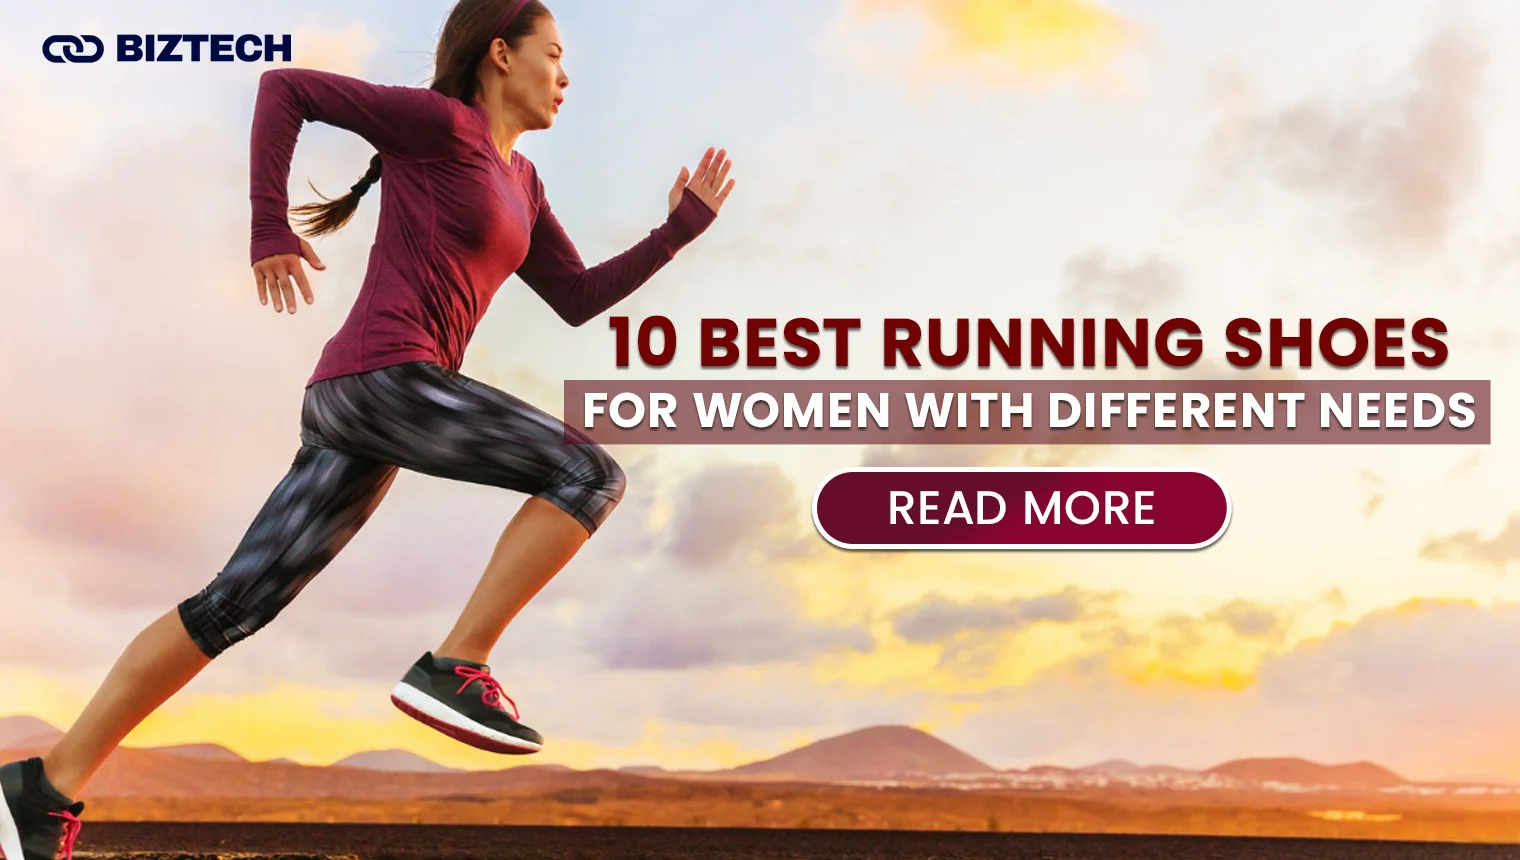 10 Best Running Shoes for Women With Different Needs